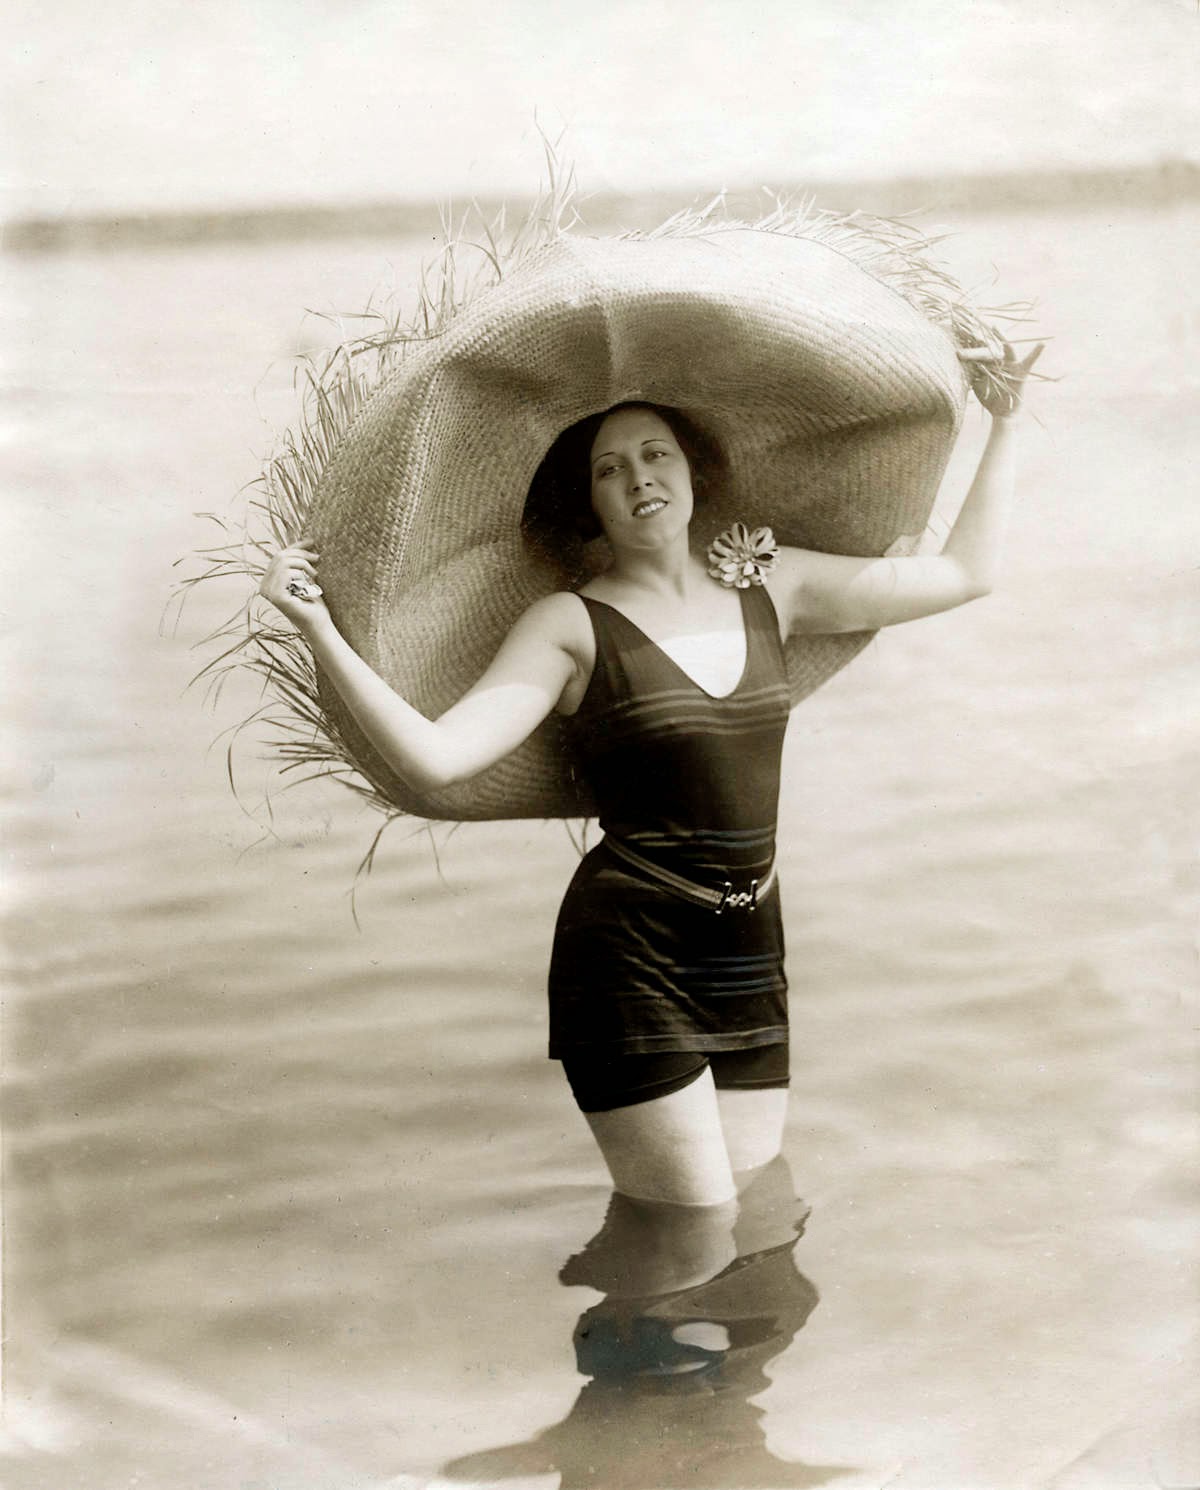 A hat in the water, ca. 1920s ~ vintage everyday